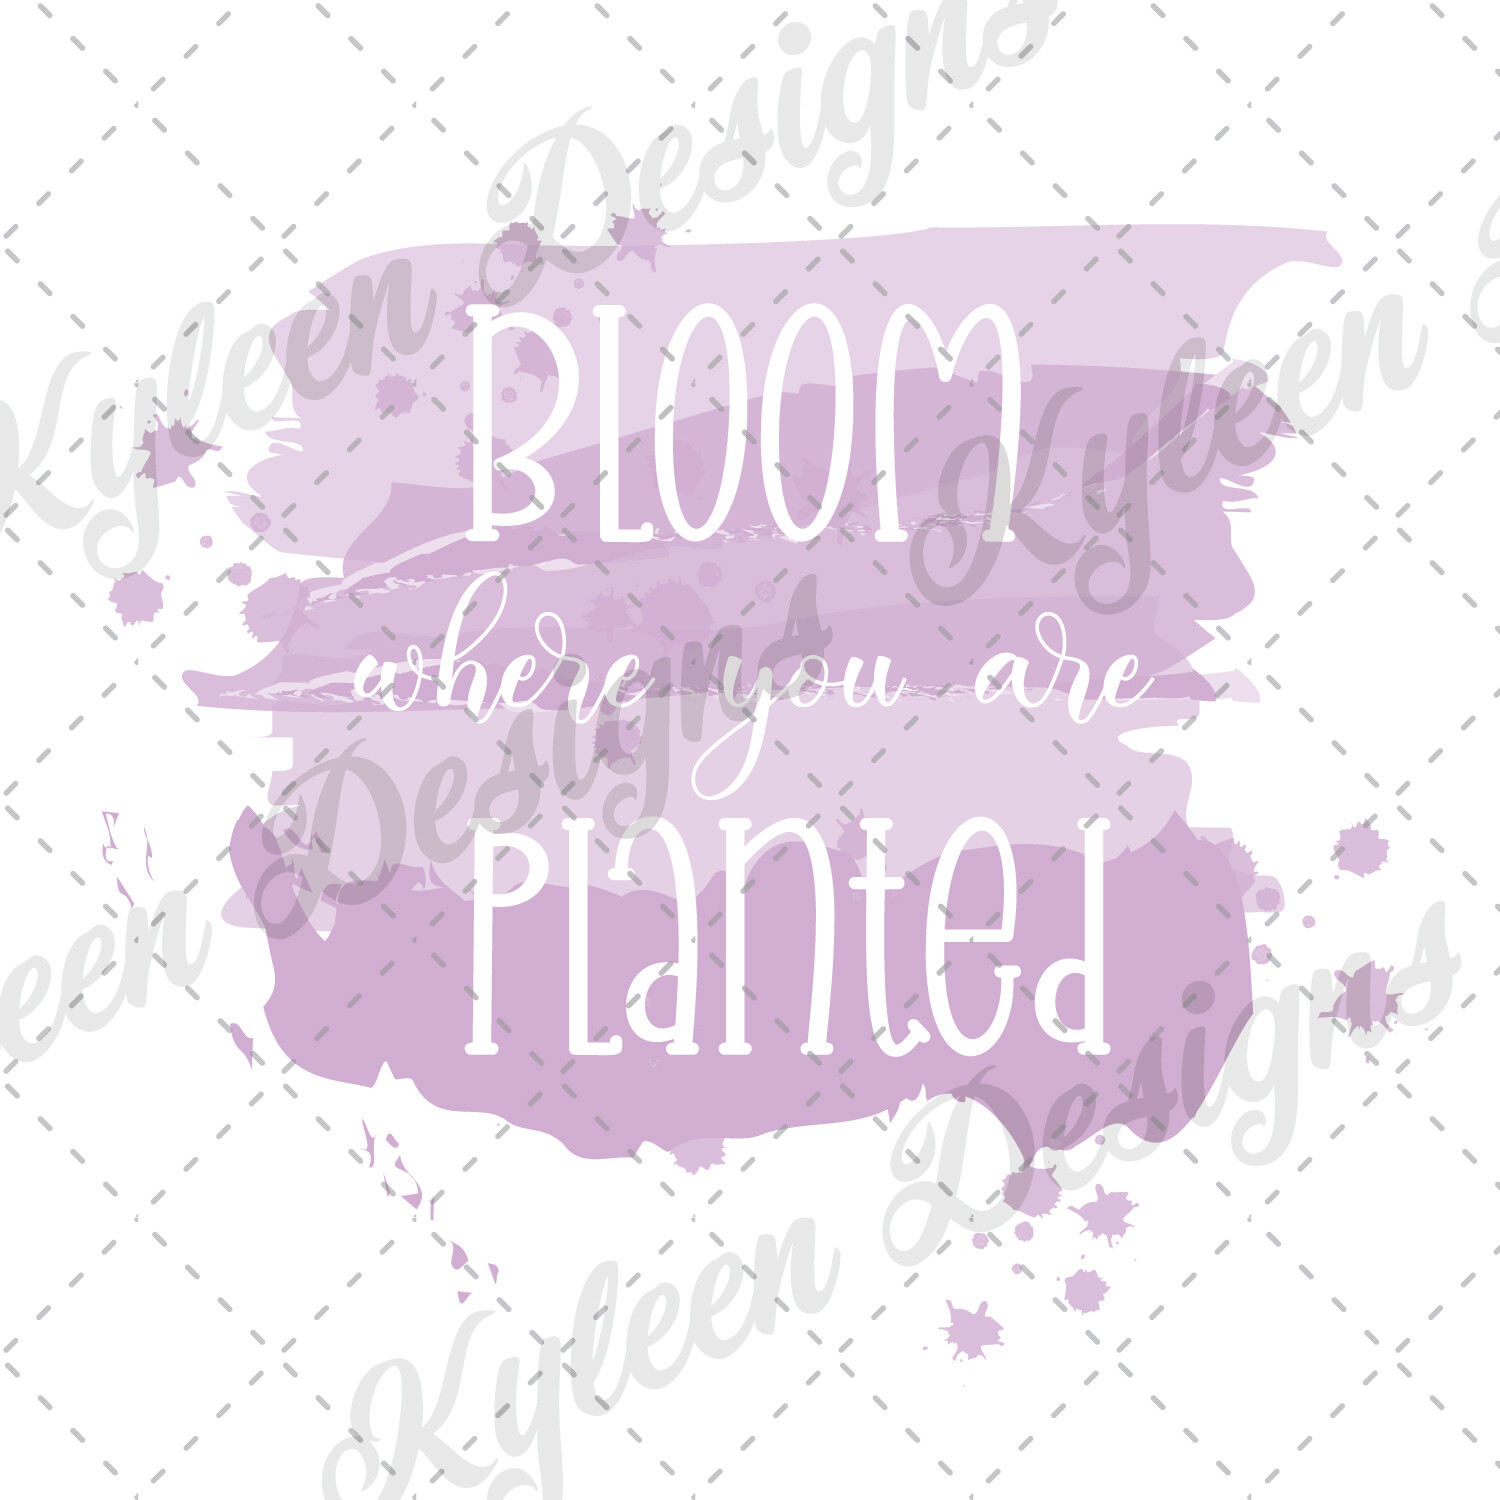 Bloom where you are planted high res 300 dpi png file